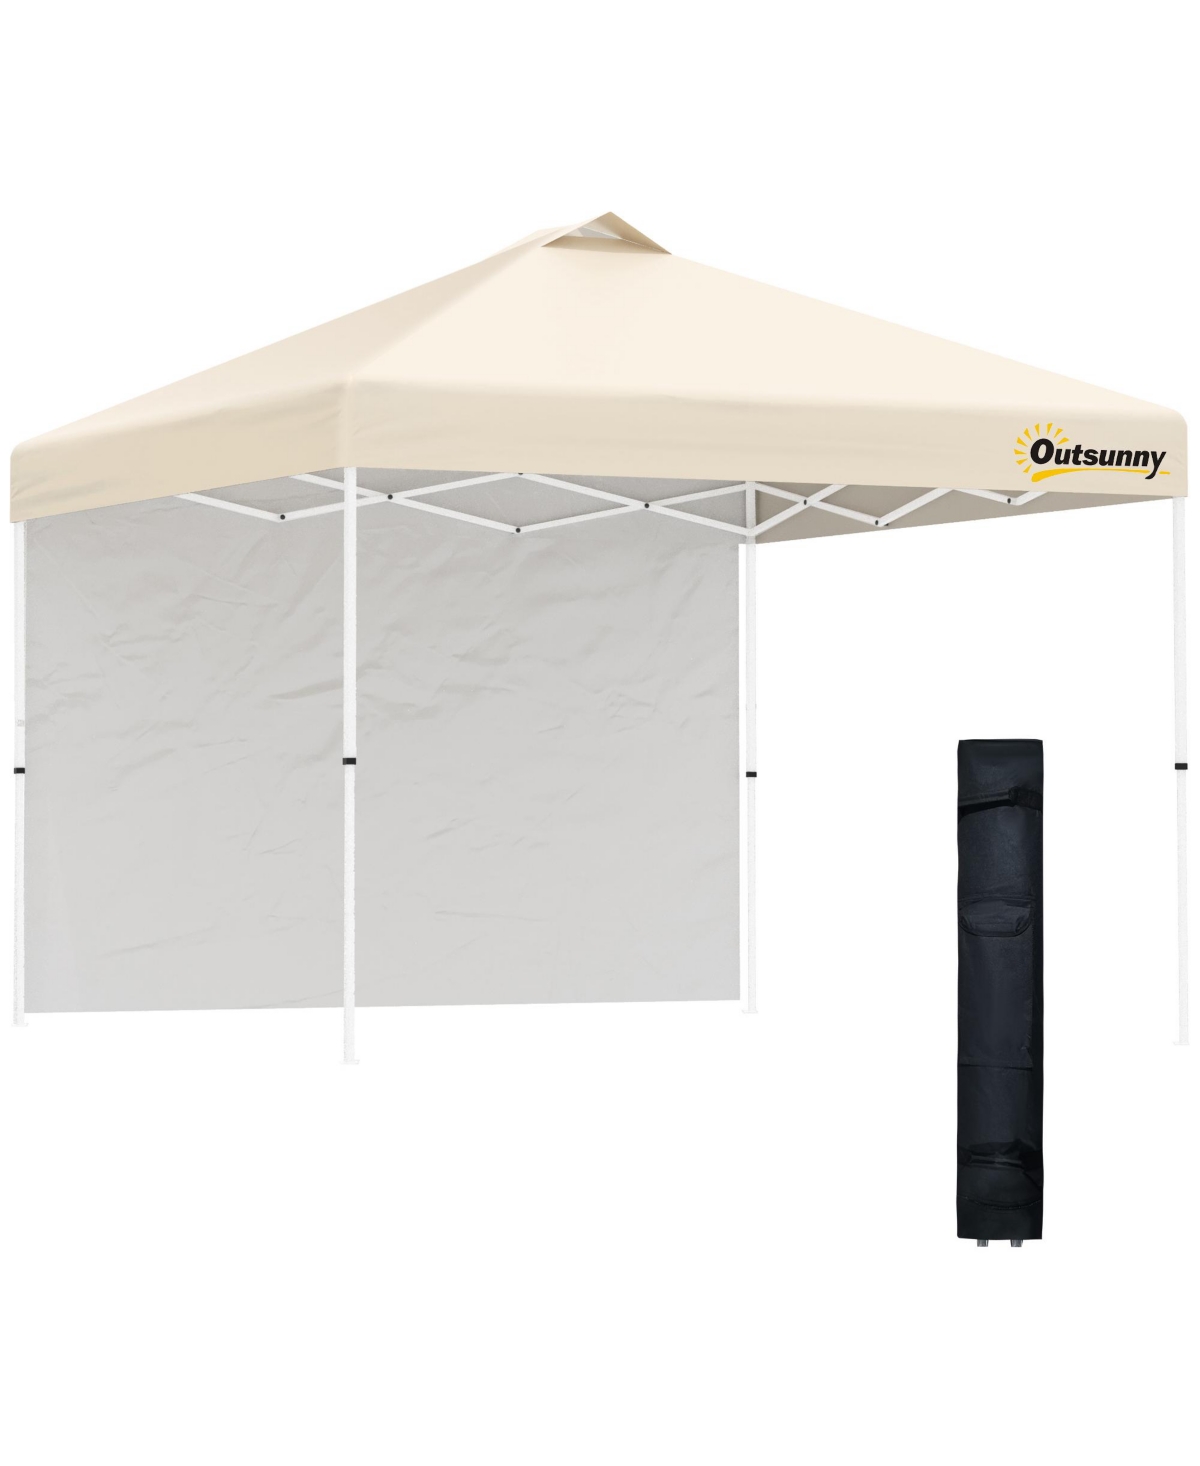 10' Pop-Up Canopy Party Tent with 1 Sidewall, Rolling Carry Bag on Wheels, Adjustable Height, Folding Outdoor Shelter, Beige - Beige